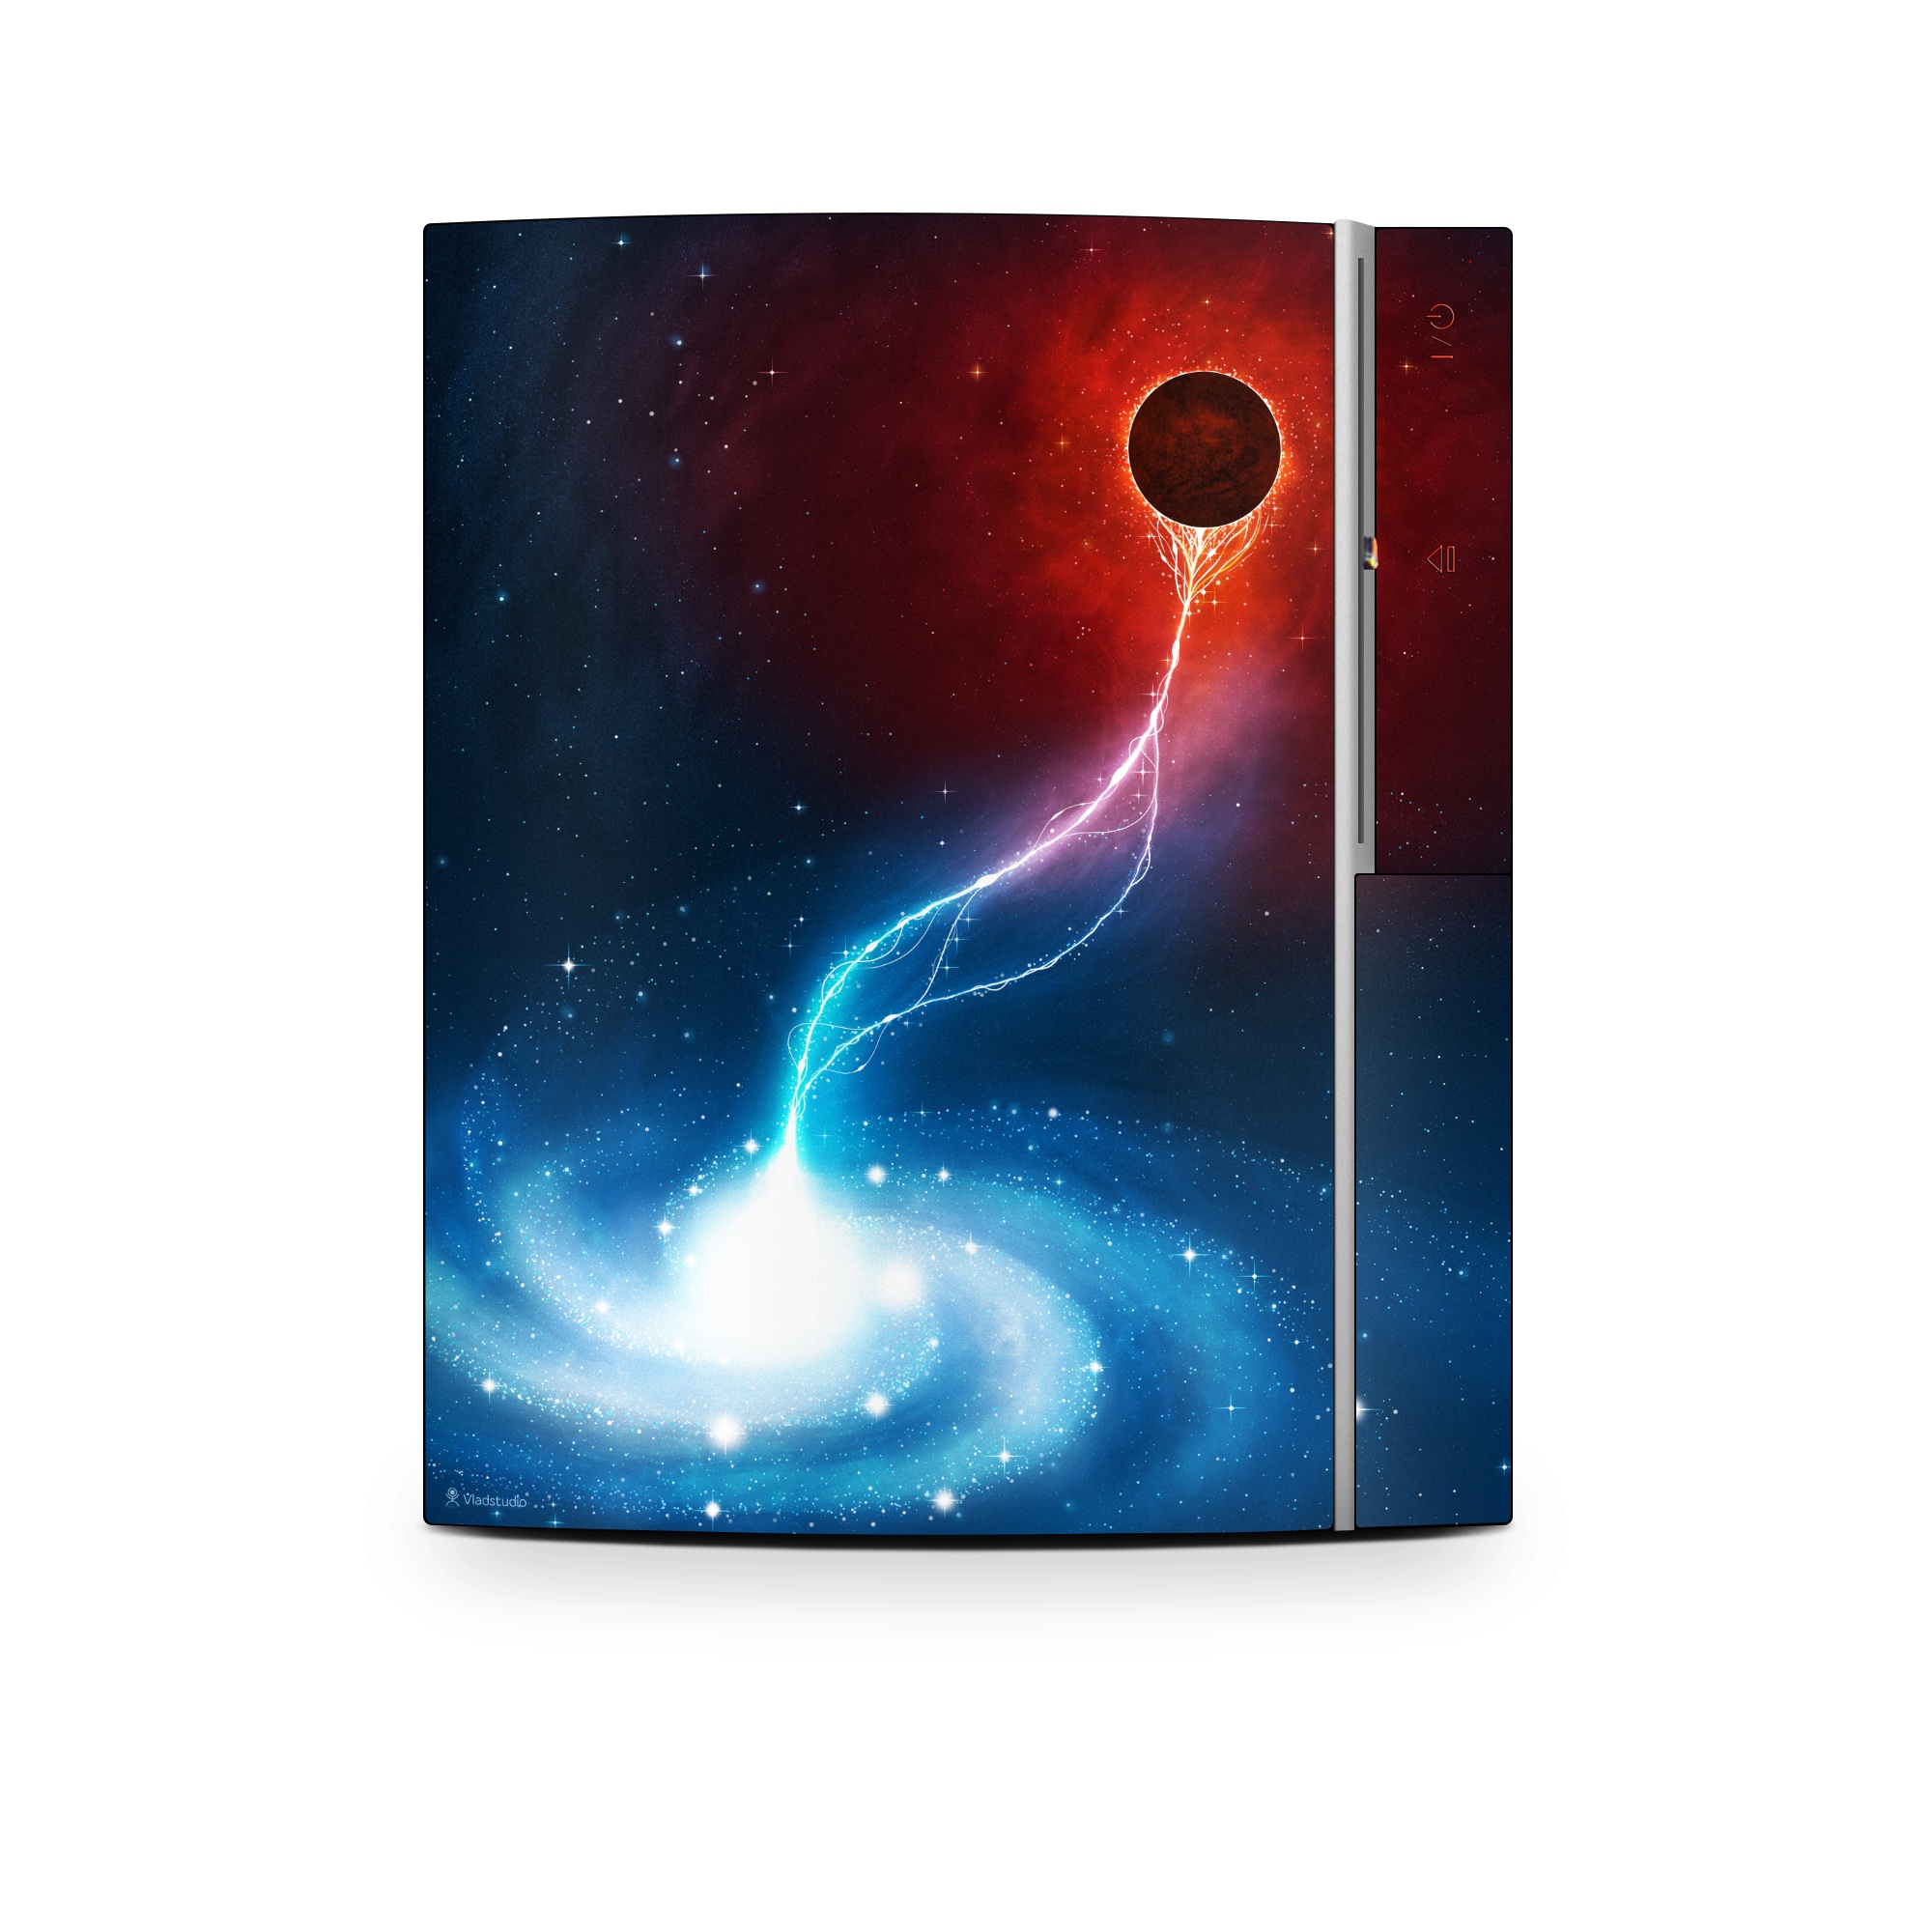 Old PS3 Skin design of Outer space, Atmosphere, Astronomical object, Universe, Space, Sky, Planet, Astronomy, Celestial event, Galaxy, with blue, red, black colors